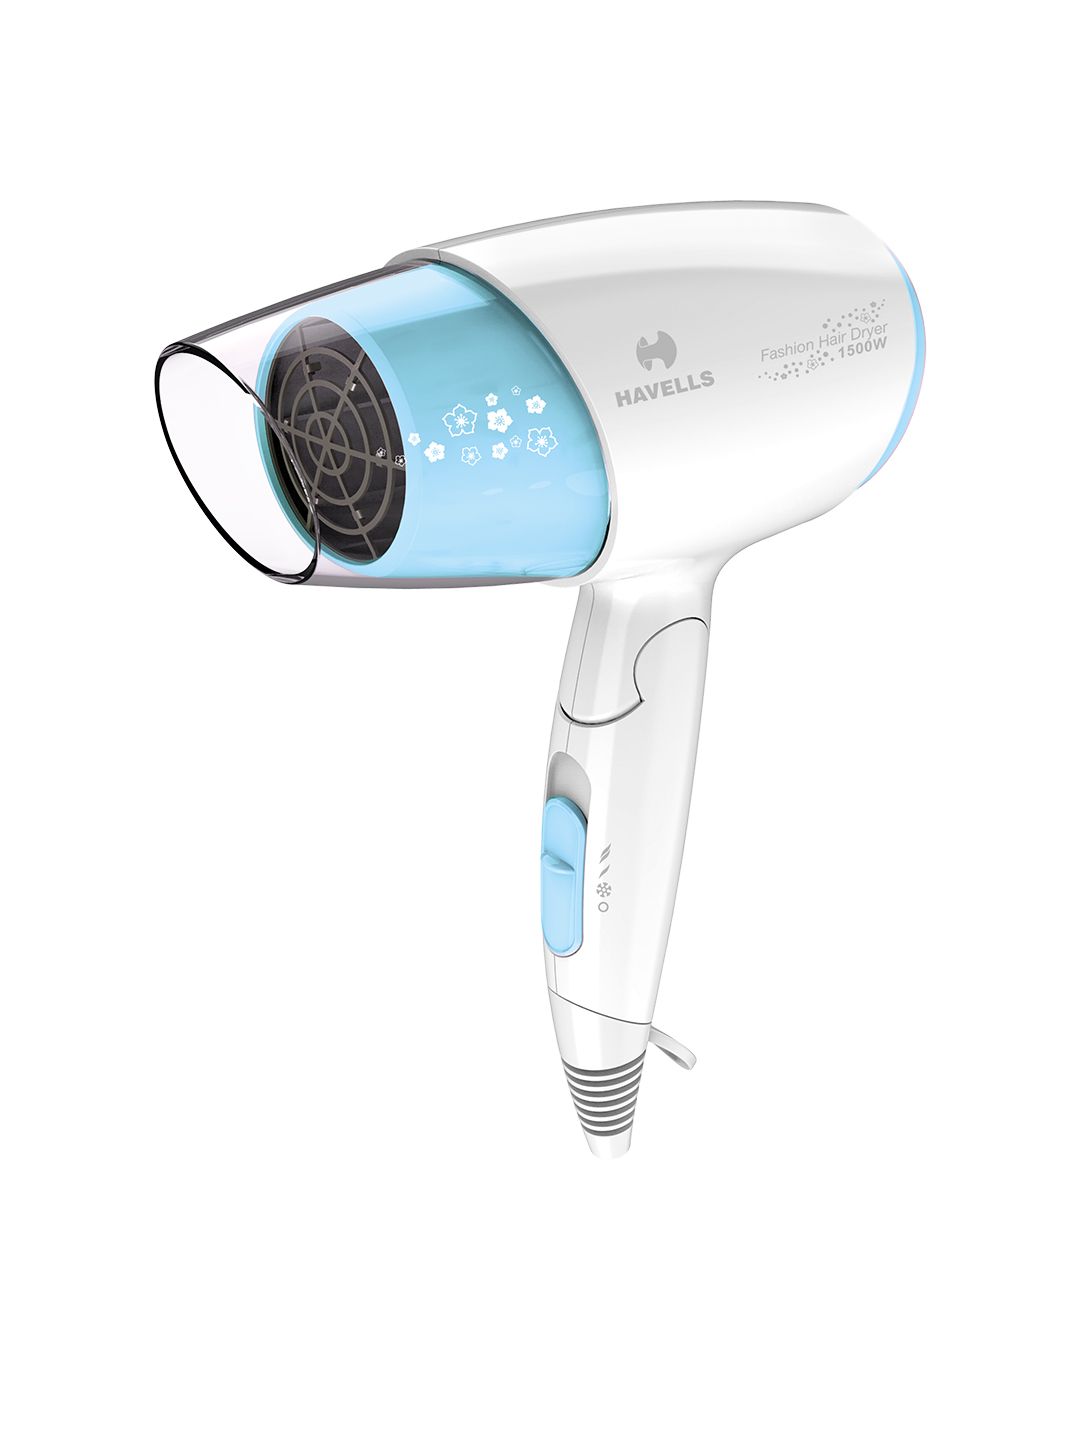 Havells HD3201 Iconic Hair Dryer - White & Blue Price in India